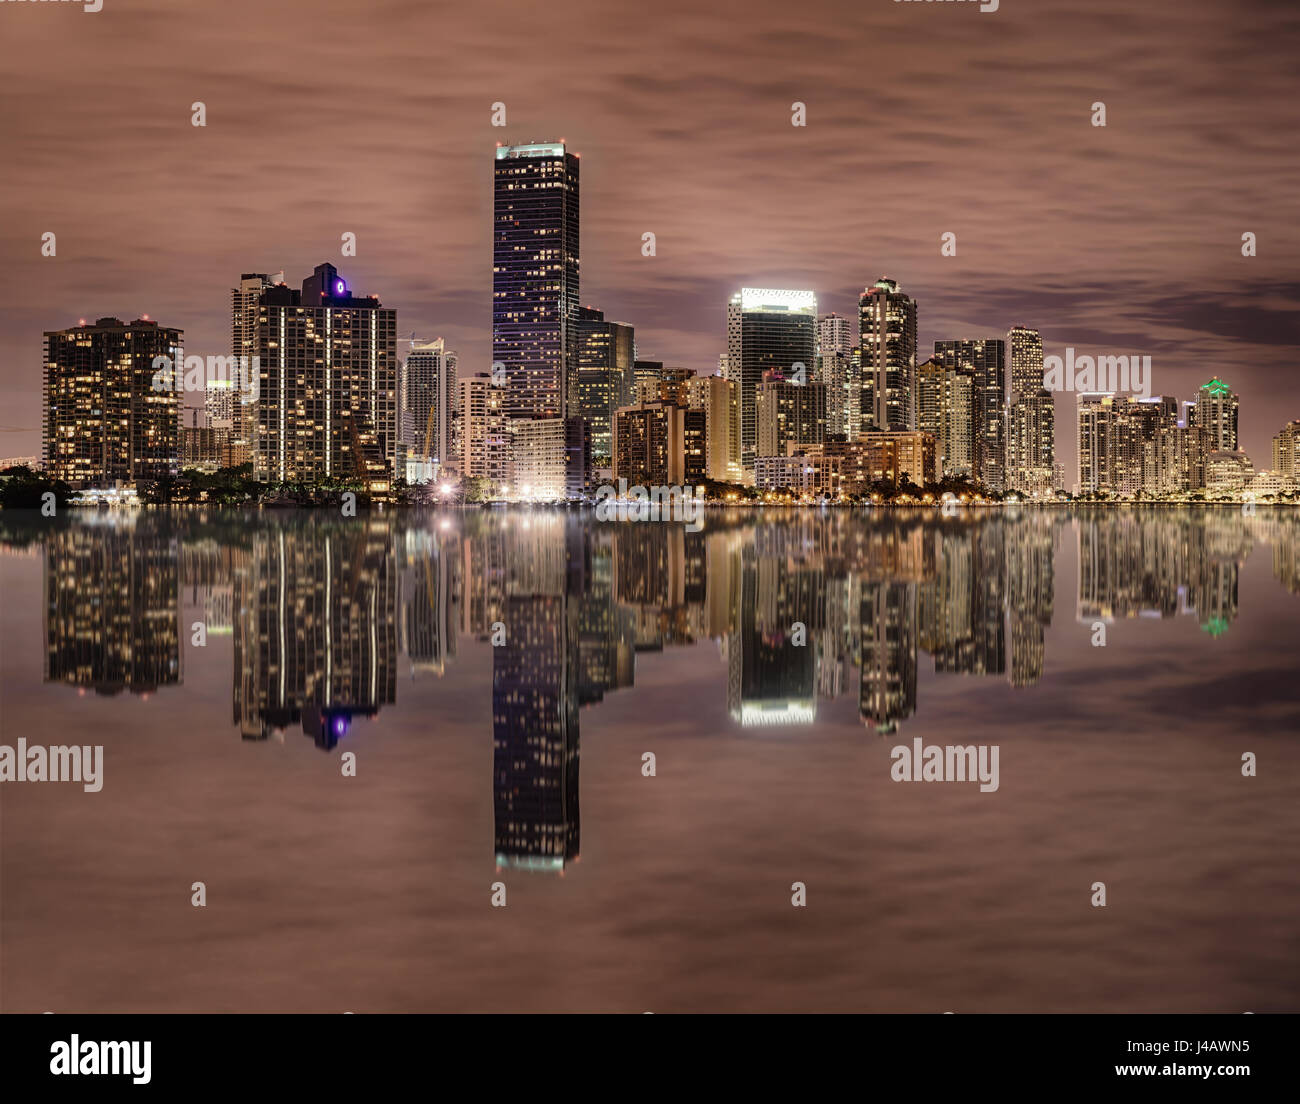 Miami bayfront skyline at night with reflections in water Stock Photo